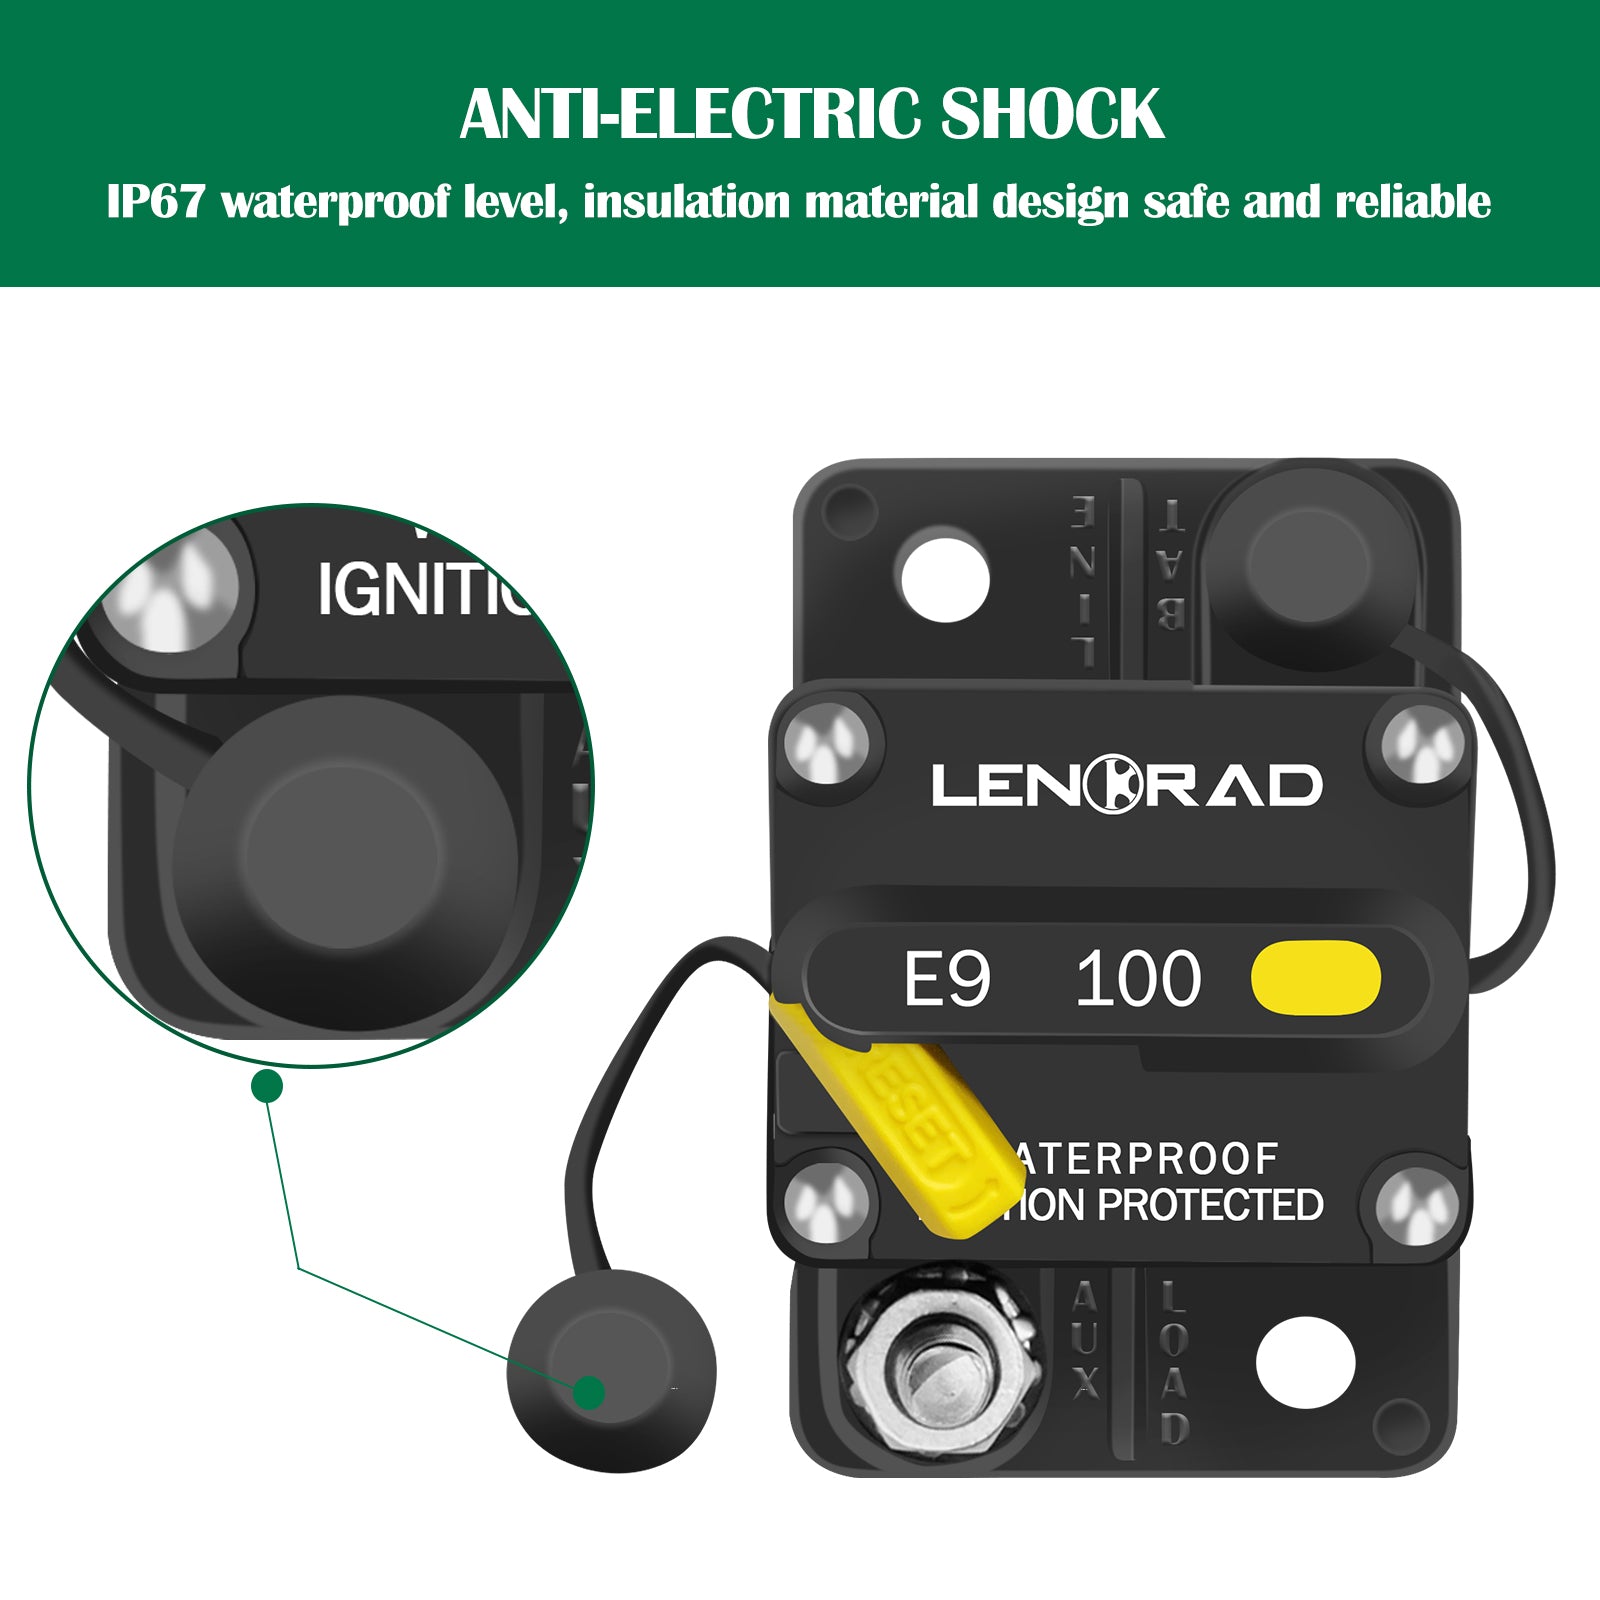 LENKRAD 100 Amp Circuit Breaker 12V with Manual Reset Switch Button for Boat Marine RV Yacht, Boat Circuit Breakers 12V - 48V DC, Waterproof(Surface Mount) - THALASSA